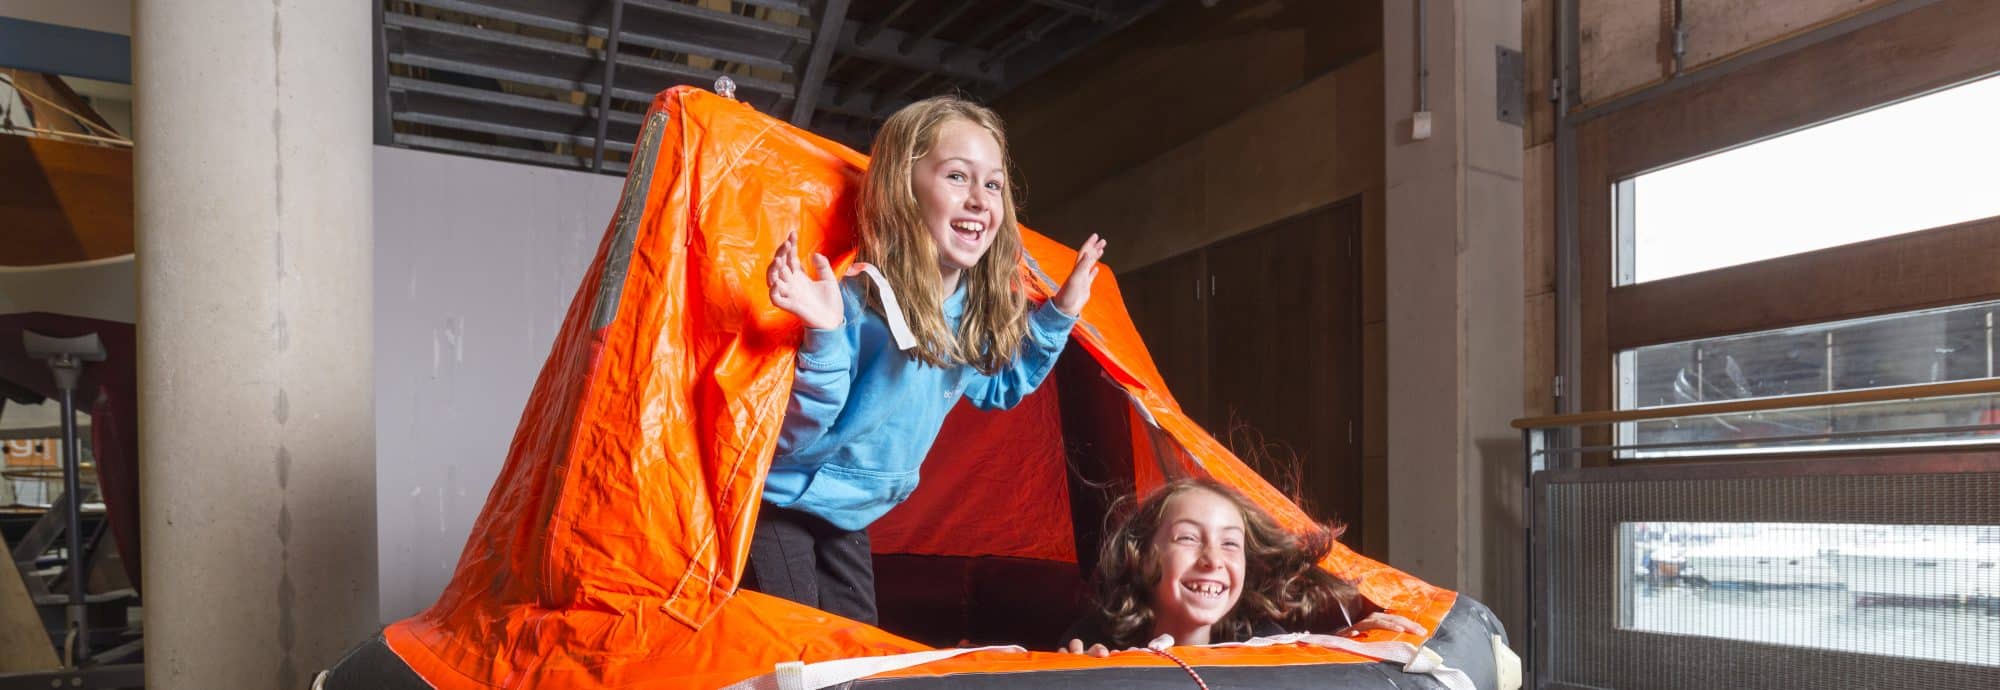 A photo of a young girl and boy playing in the life raft that was on display in the Museum's Nav Station.